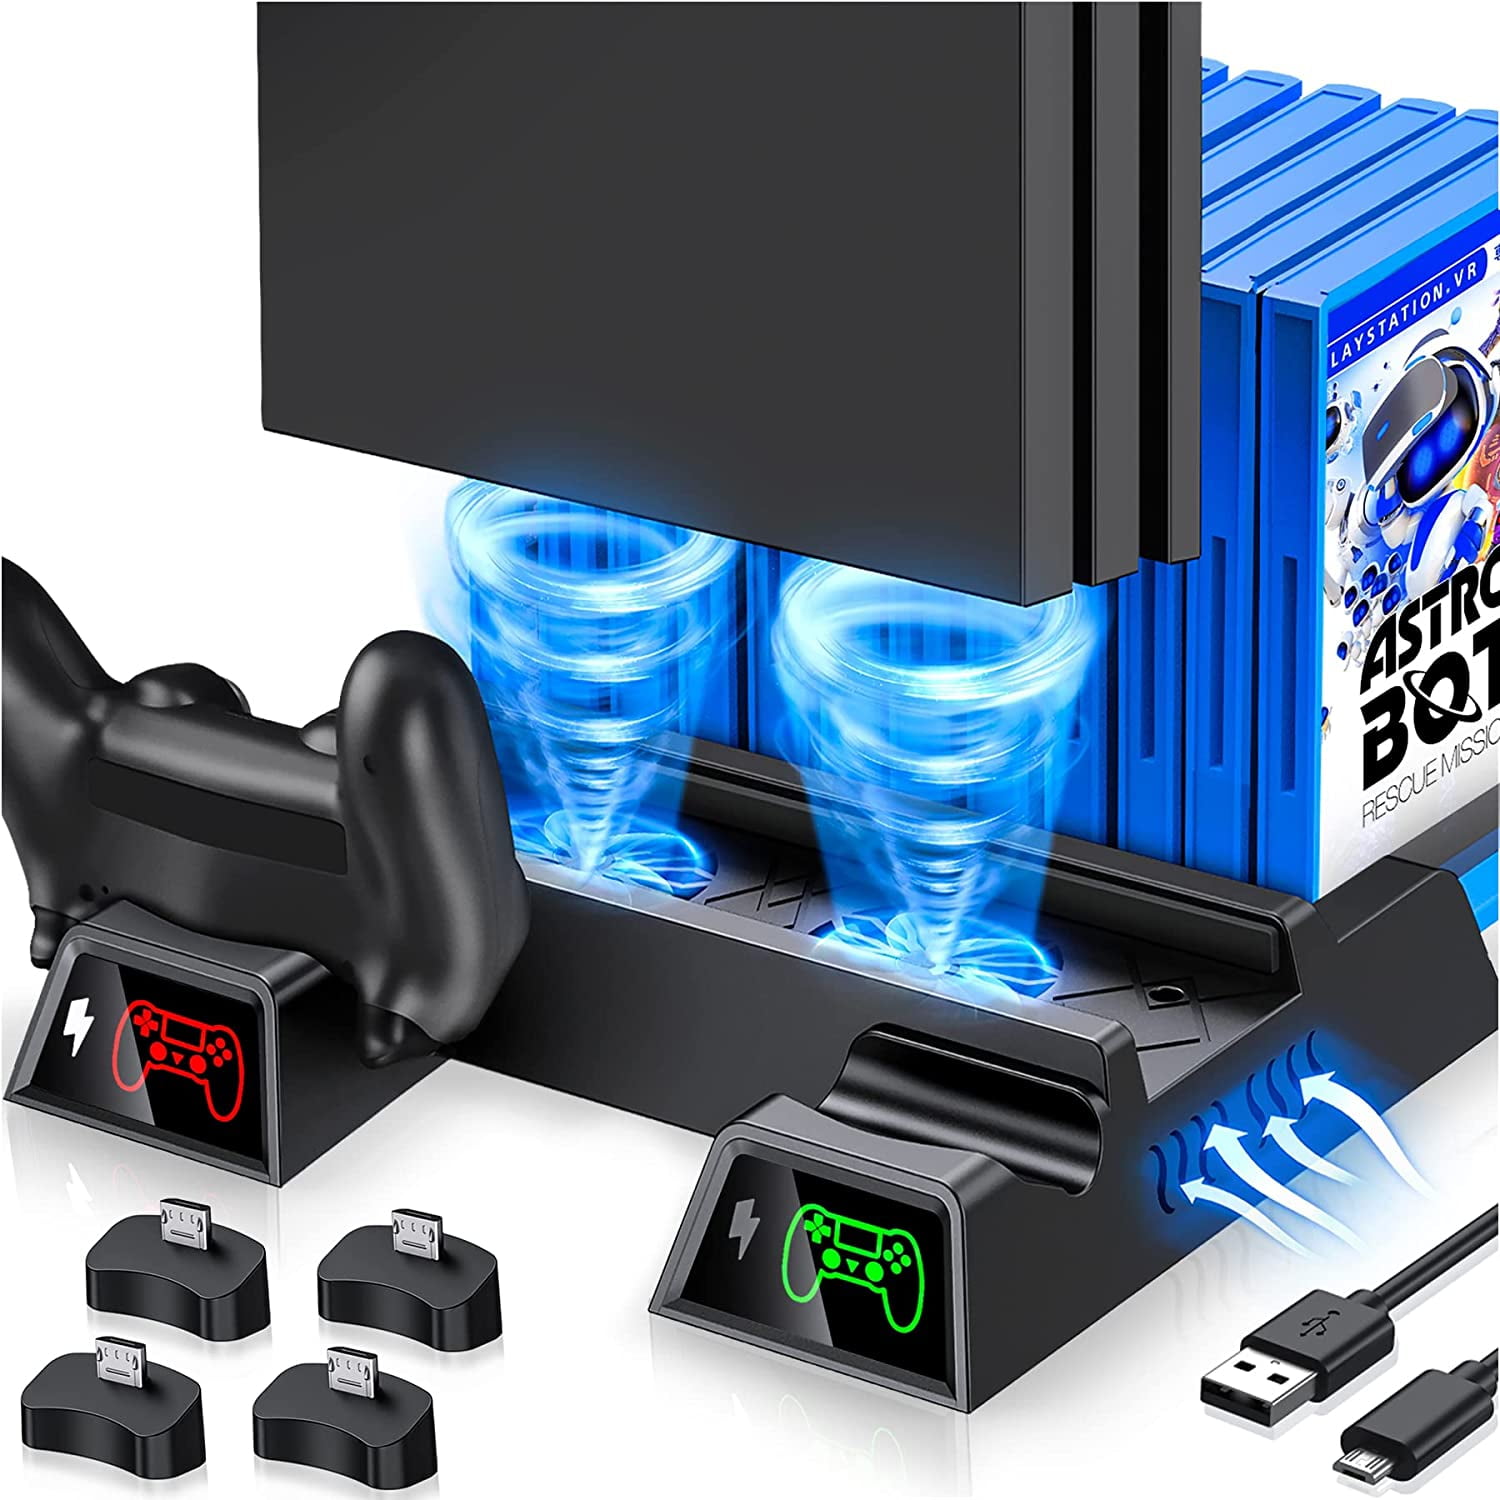 BEBONCOOL PS4 Stand Cooling Fan with Dual Controller Charging Station for PS4 Slim/ PS4 Pro Gaming Consoles, Accesossries with 12 Game Storage Black - Walmart.com